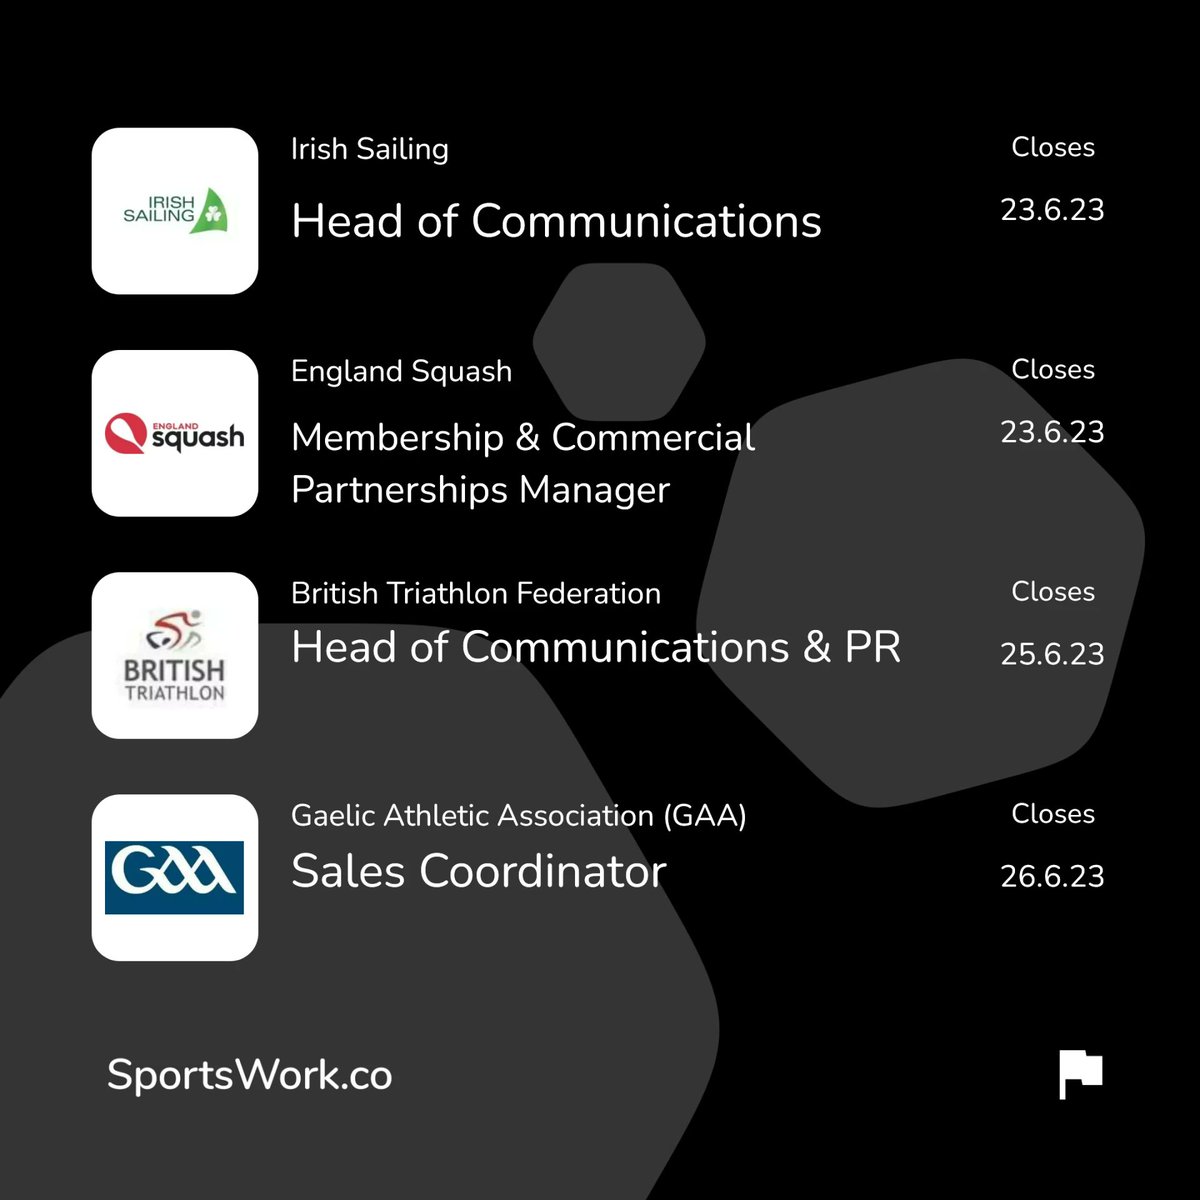 🚨 Ending Soon 🚨

These jobs and many more are ending soon.

Check them out before you miss out on a potential dream job - sportswork.co

#sportswork #sportsjobs #workinsport